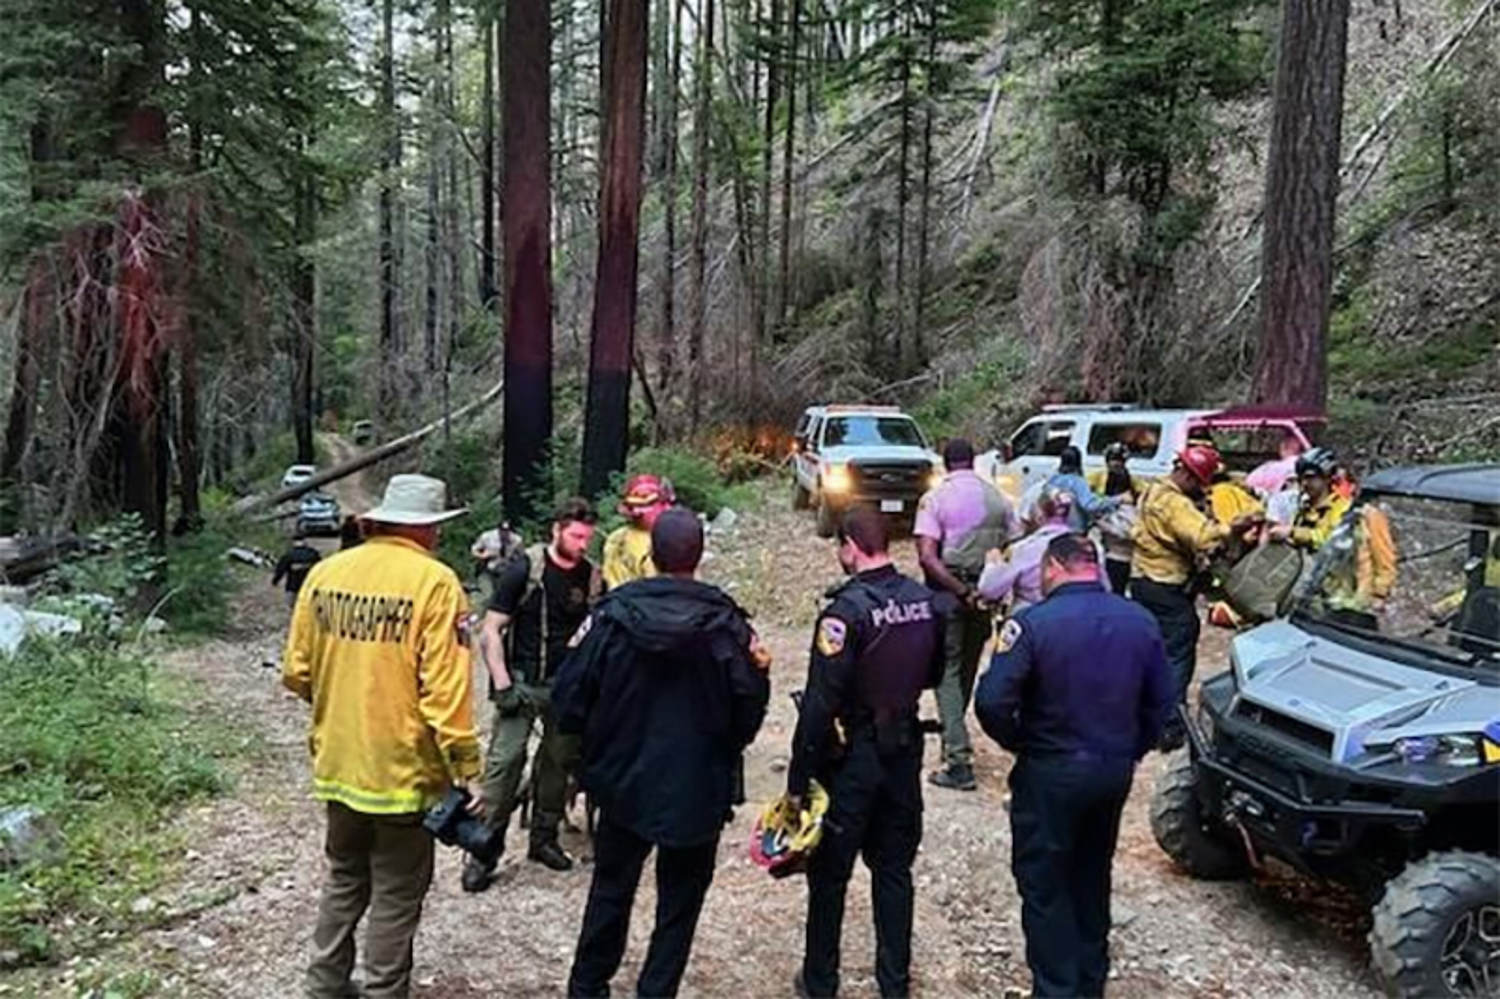 Missing California hiker says he survived on creek water before being found 9 days later